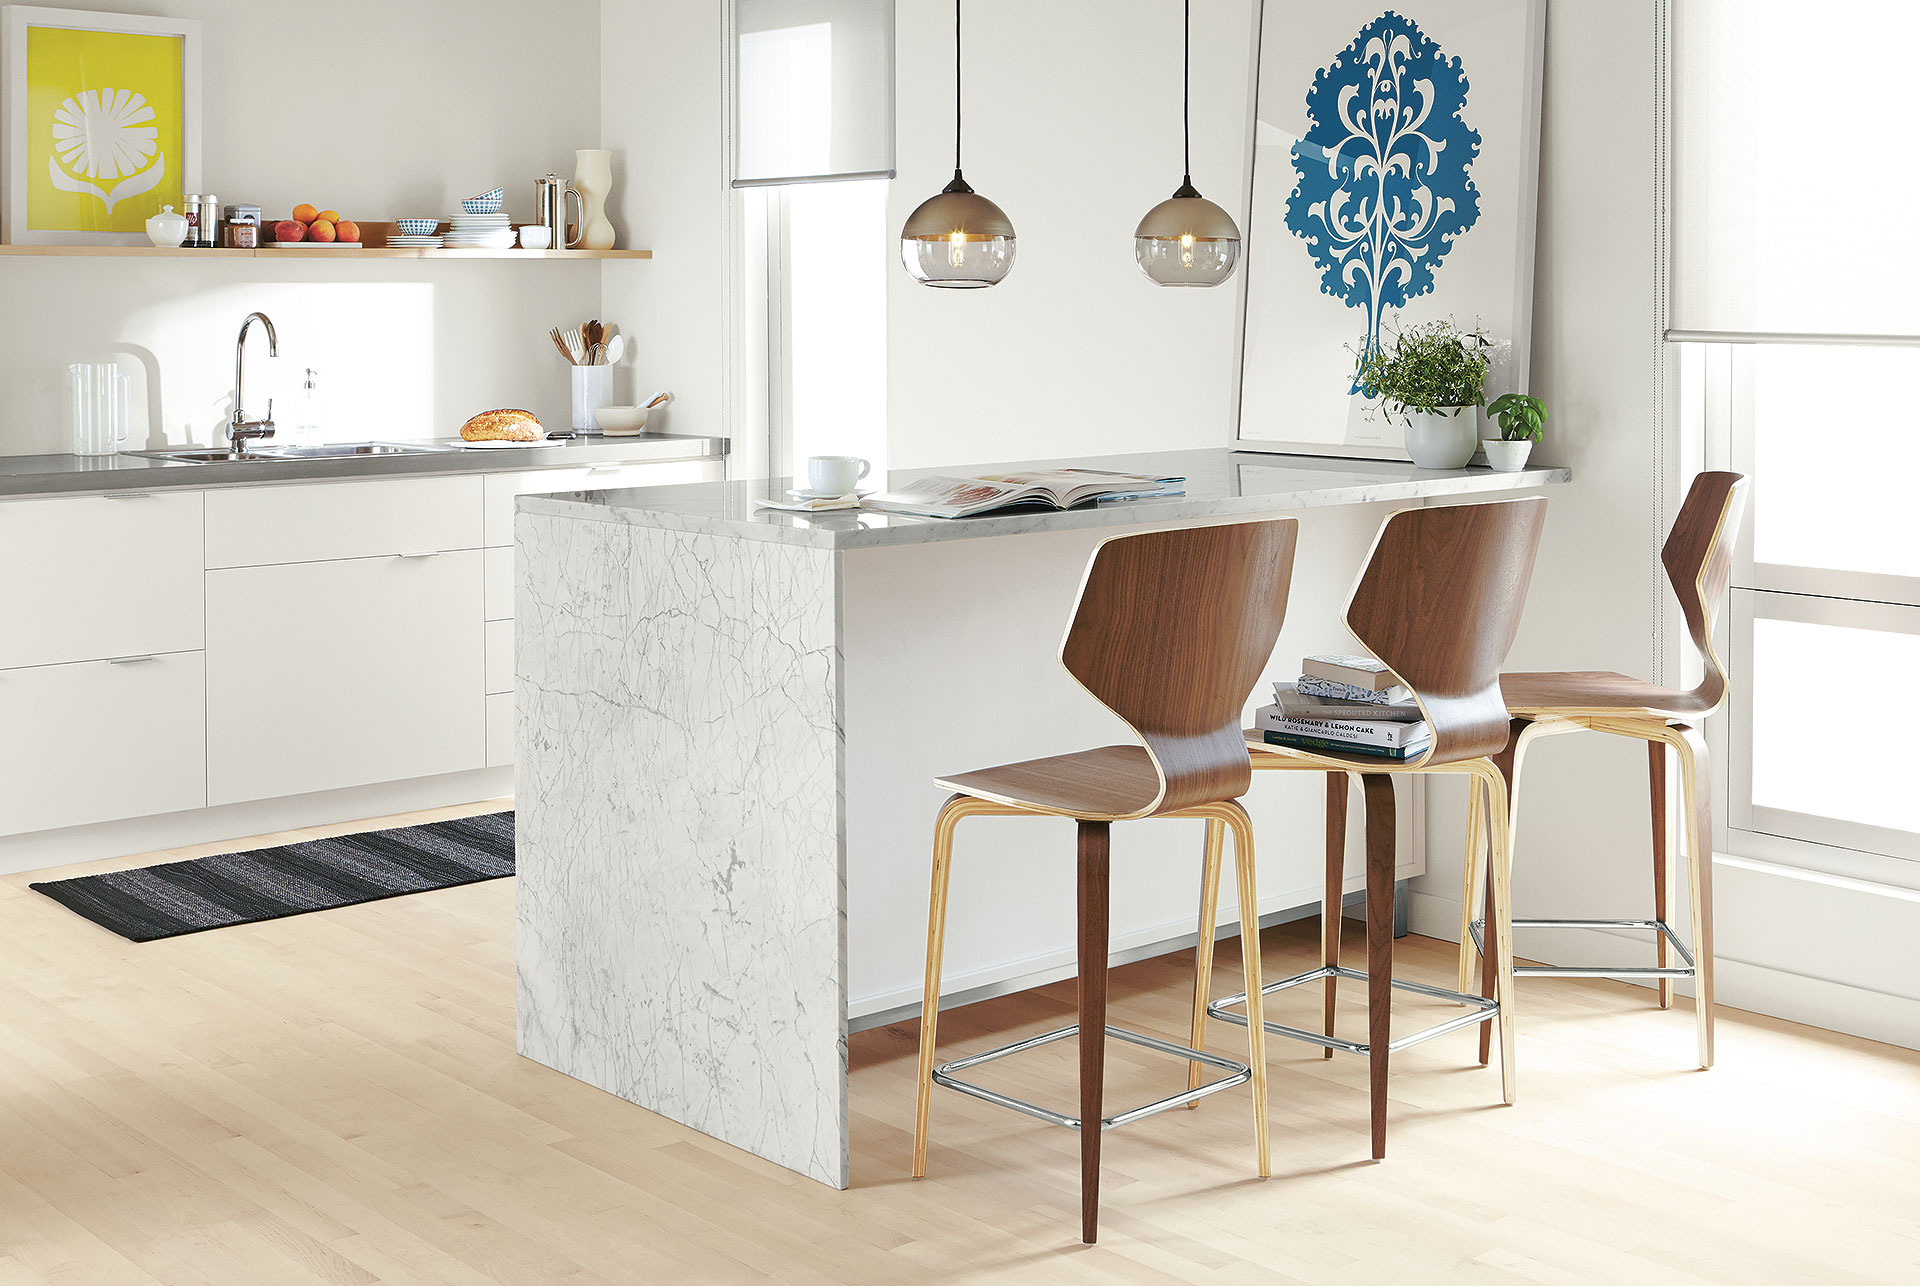 How To Choose Counter Bar Stools, Rooms To Go Counter Bar Stools